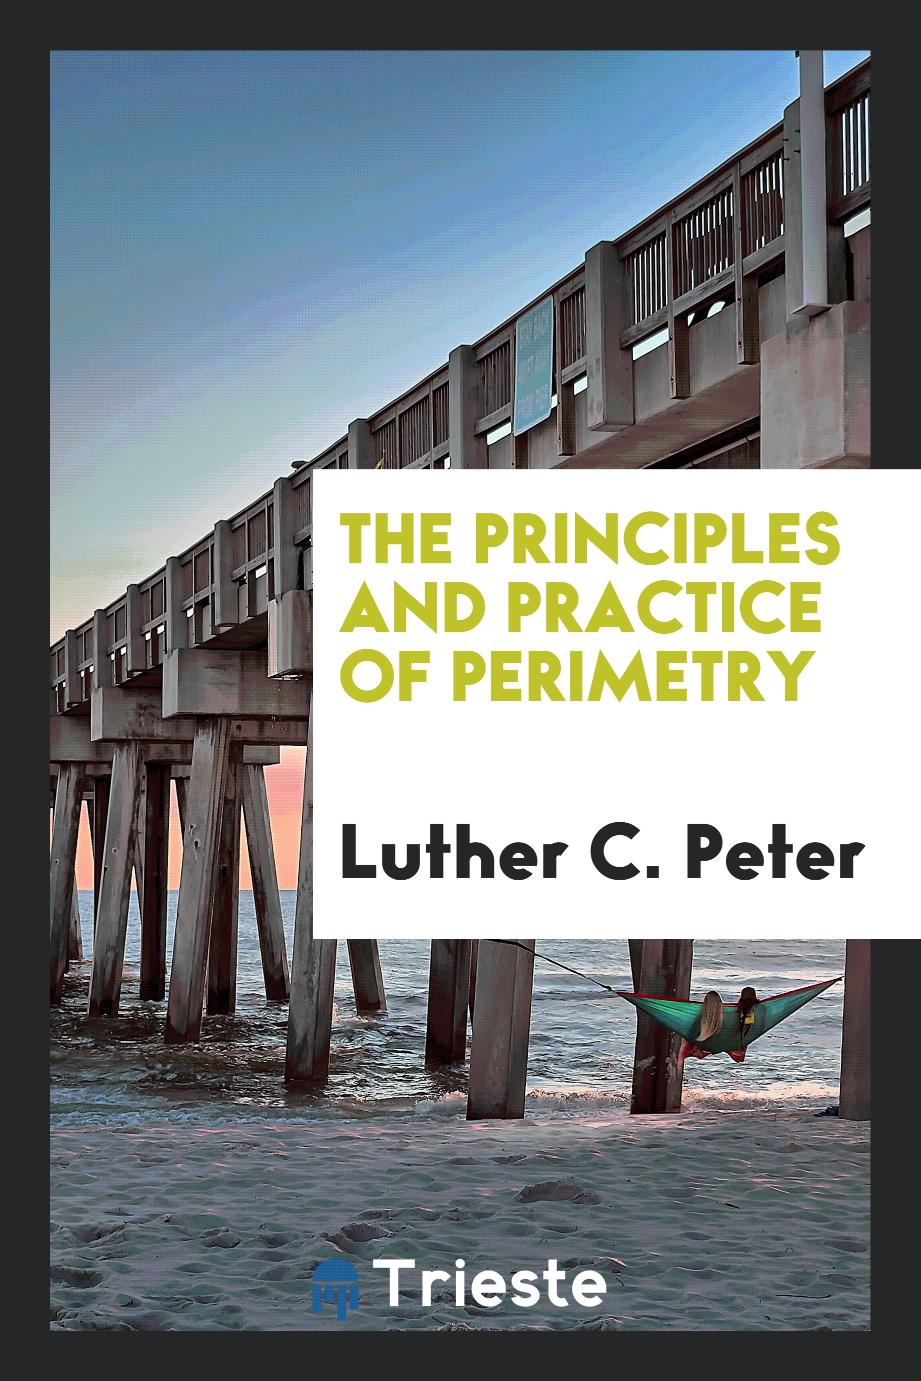 The principles and practice of perimetry